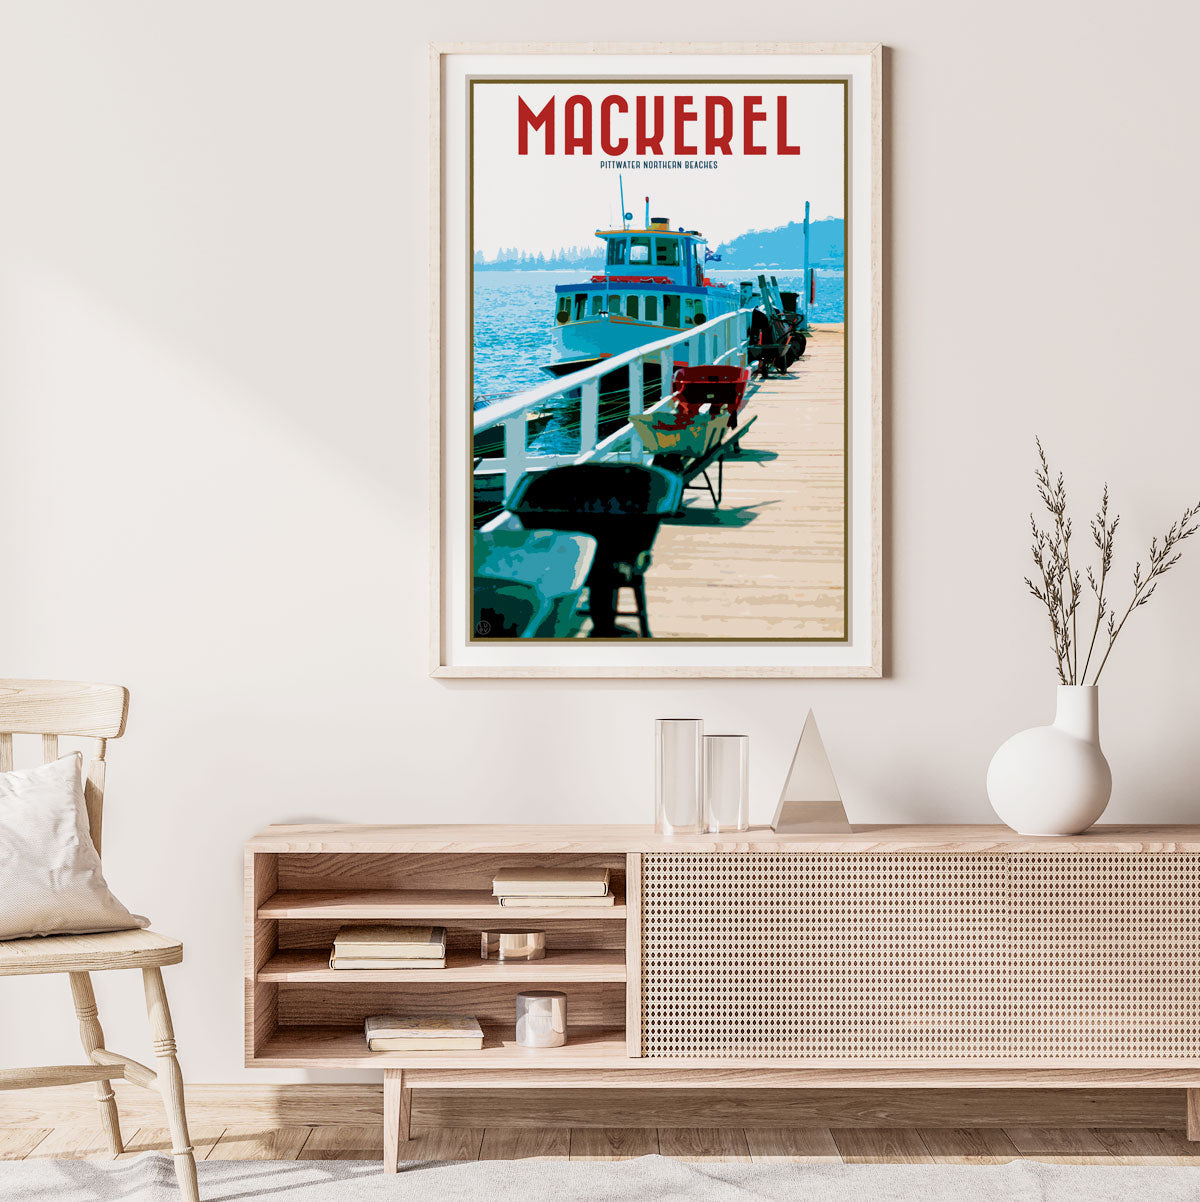 Mackerel Pittwater vintage retro poster by Places We Luv